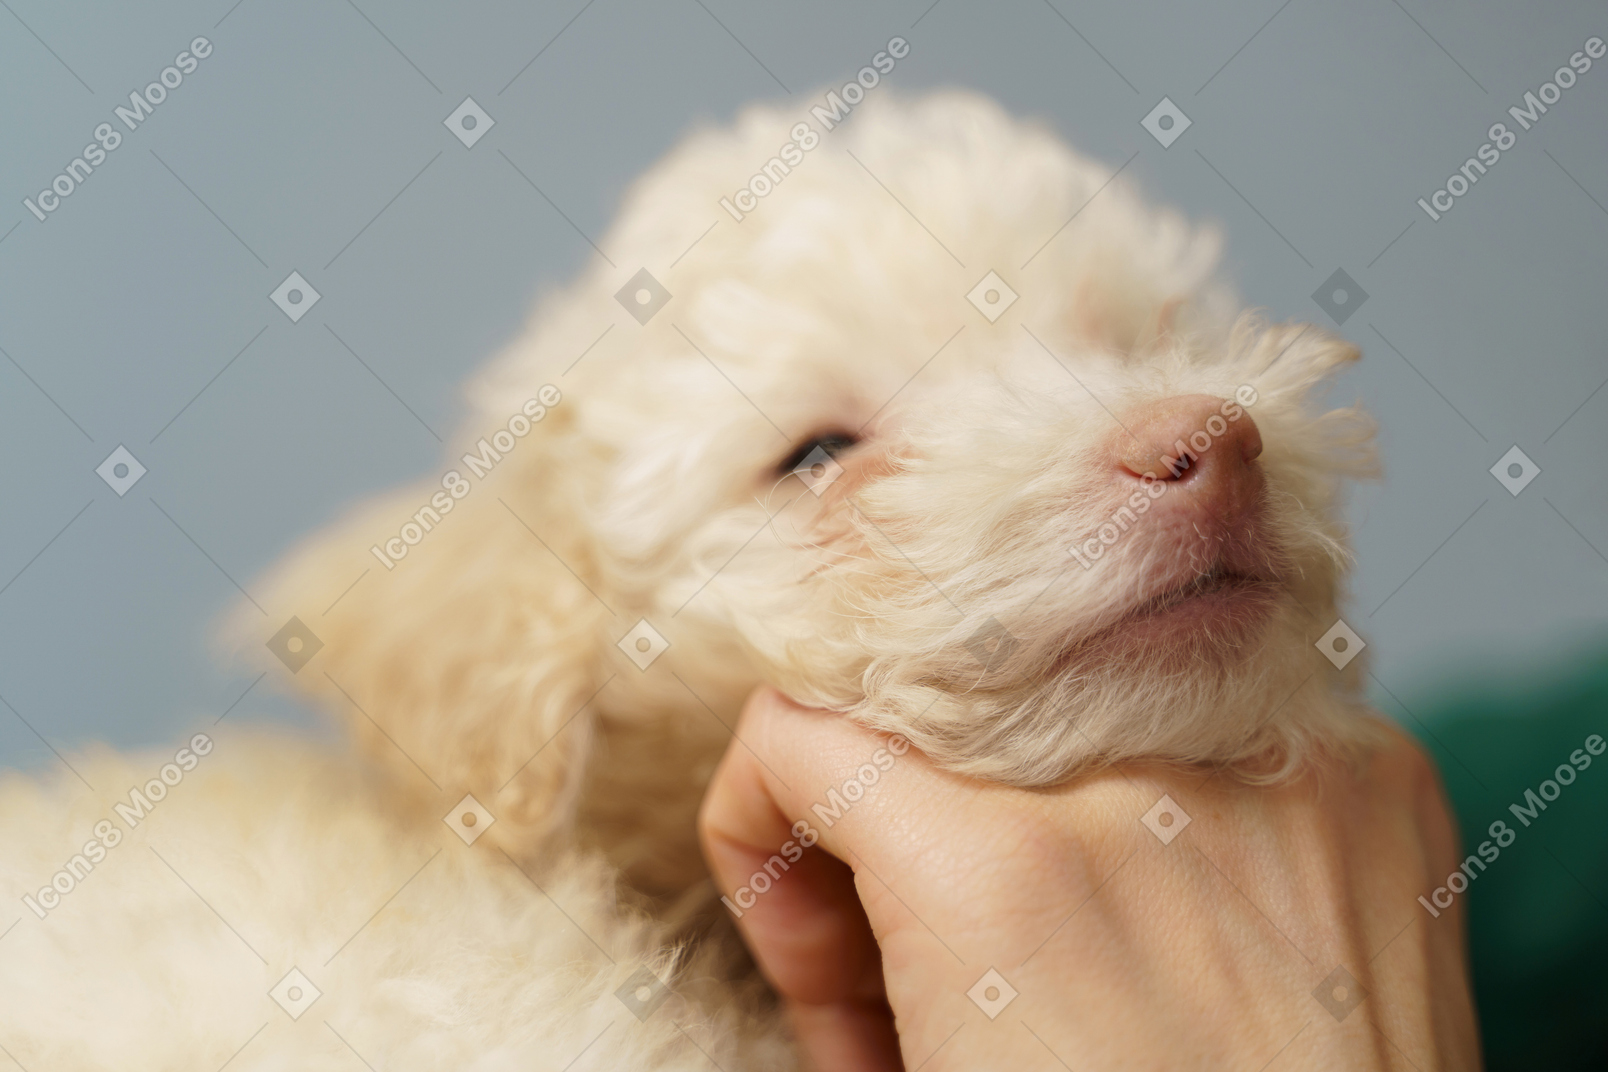 Close-up of a tiny poodle putting chin on human's hand